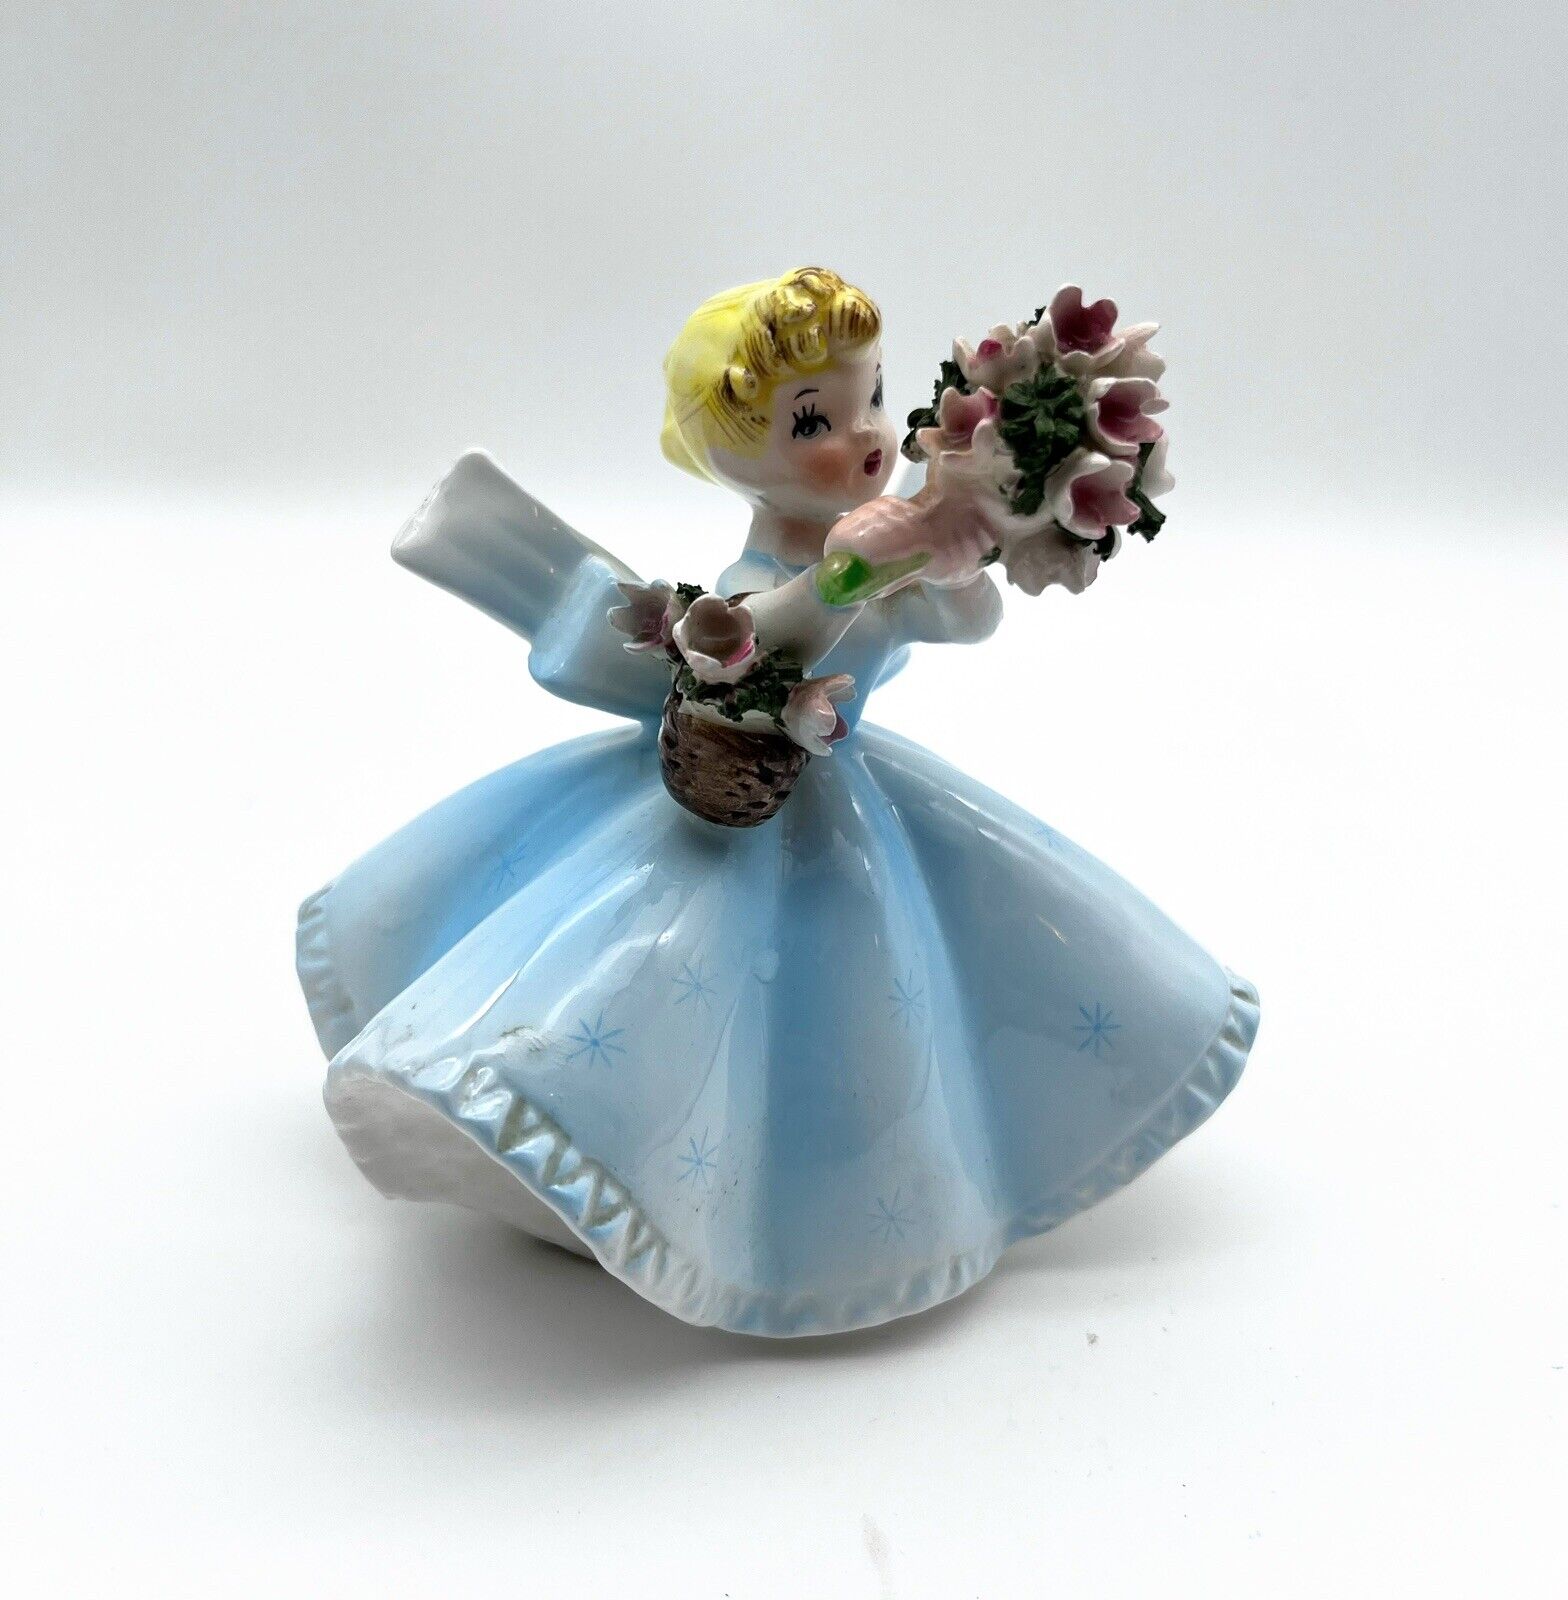 Vintage 1960s Lefton Girl Blue Dress With Bouquet Of Flowers Figurine